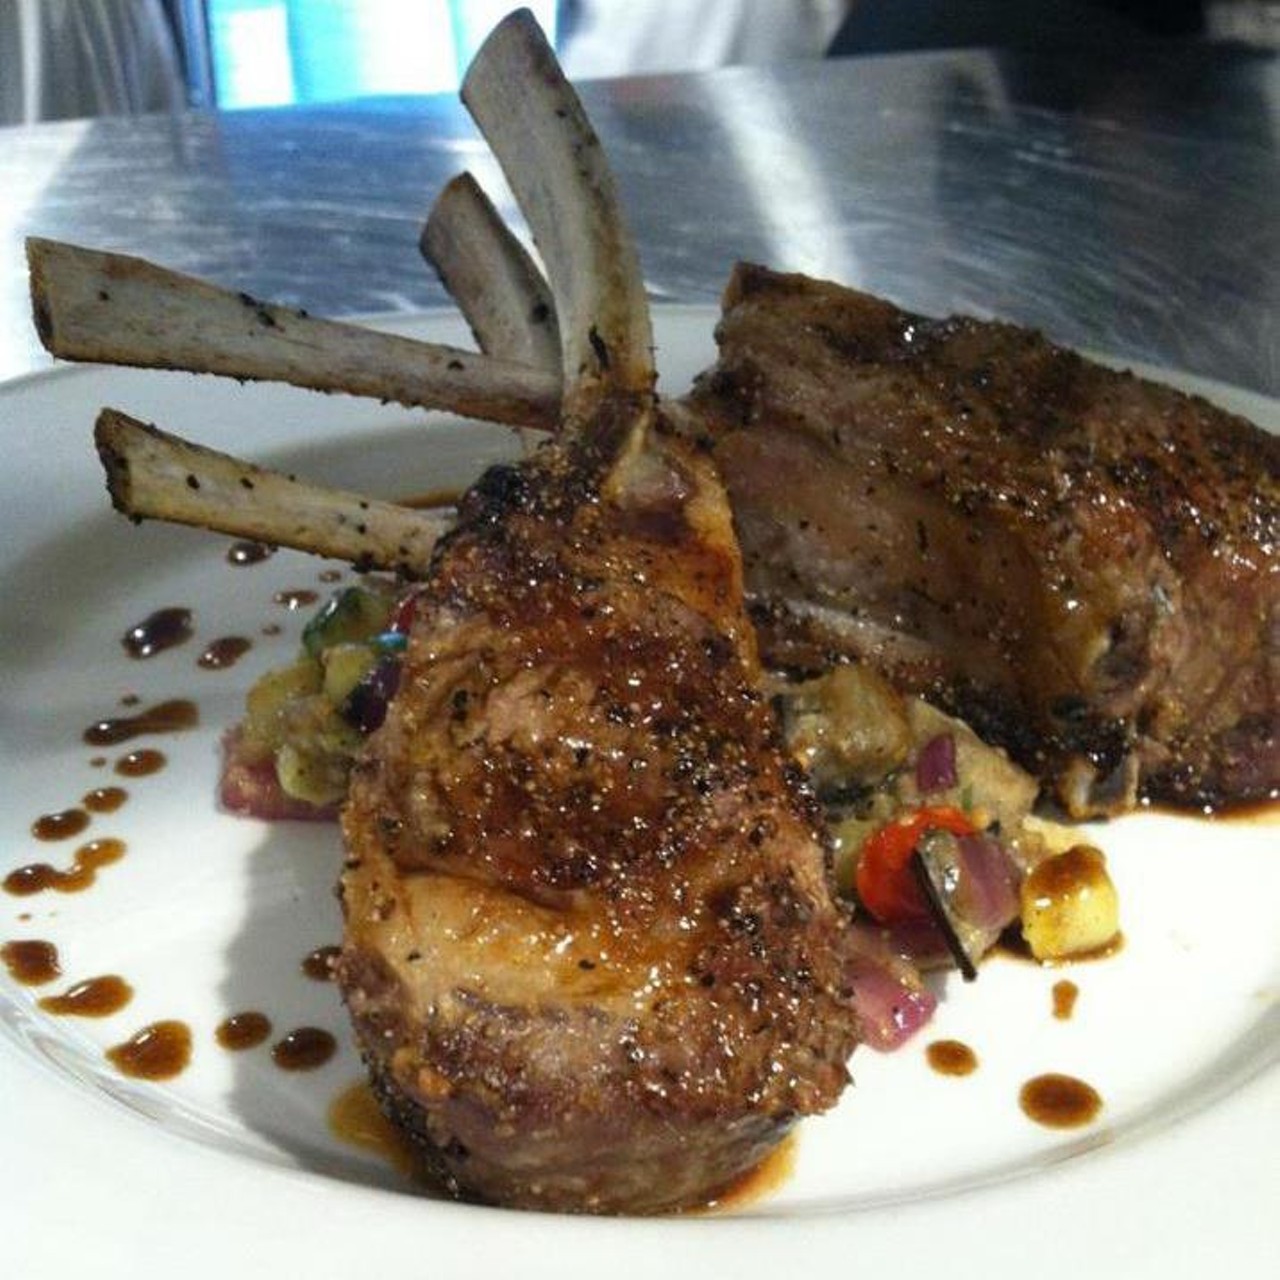 London Chop House-style lamb chops 
You&#146;re not crazy. Lamb chops seem to be on just about every menu in Detroit. So, what gives? You know, what? It doesn&#146;t matter. All that matters is that it&#146;s done right, which is how Detroit&#146;s 80-plus-year-old James Beard Award-winning steakhouse, London Chop House &#151; which absolutely puts the chop in lamb chop &#151;&nbsp;does it. Anyway, LCH&#146;s lamb chops come double cut with a mushroom, baby turnip, and pearl onion ragout. While the recipe may not be available online, the following recipes are comparable. (And sound friggin&#146; delicious!)
Find the recipe for double cut rosemary crusted lamb chops here and sauteed mushroom, arugula, and pearl onion recipe here.
The London Chop house is temporarily closed. Visit their Facebook page for updates.
Photo via The London Chop House/Facebook 